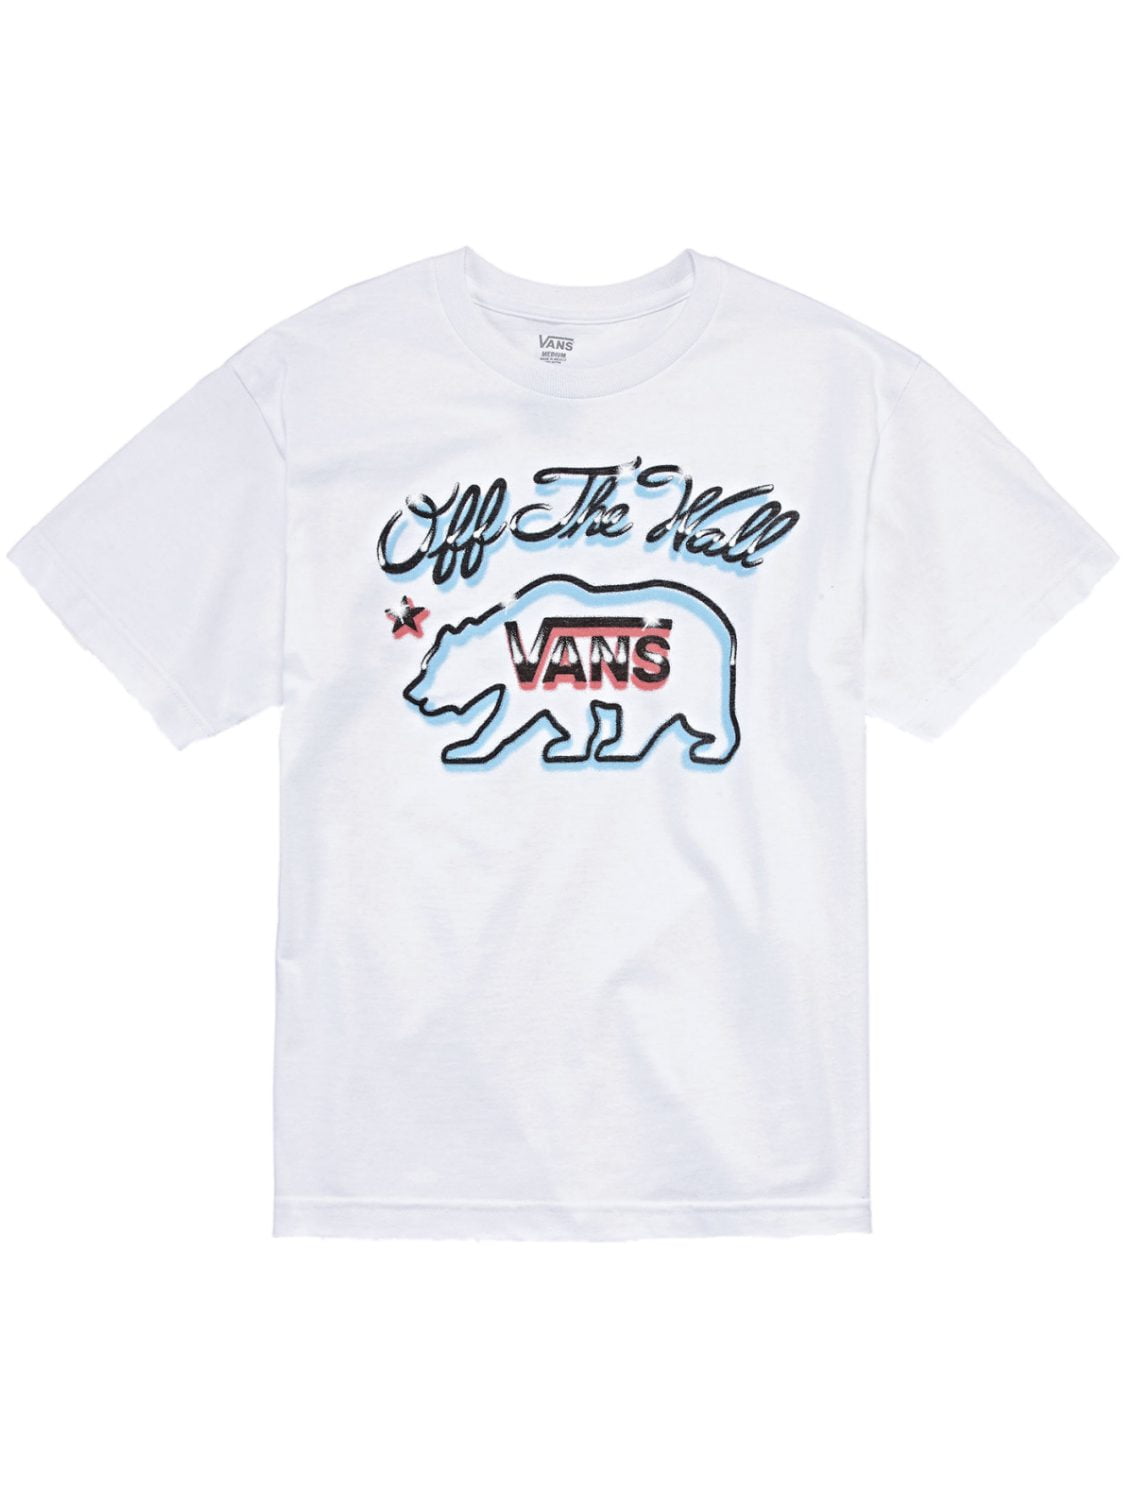 Boys Vans Off The Wall White Blue \u0026 Red 